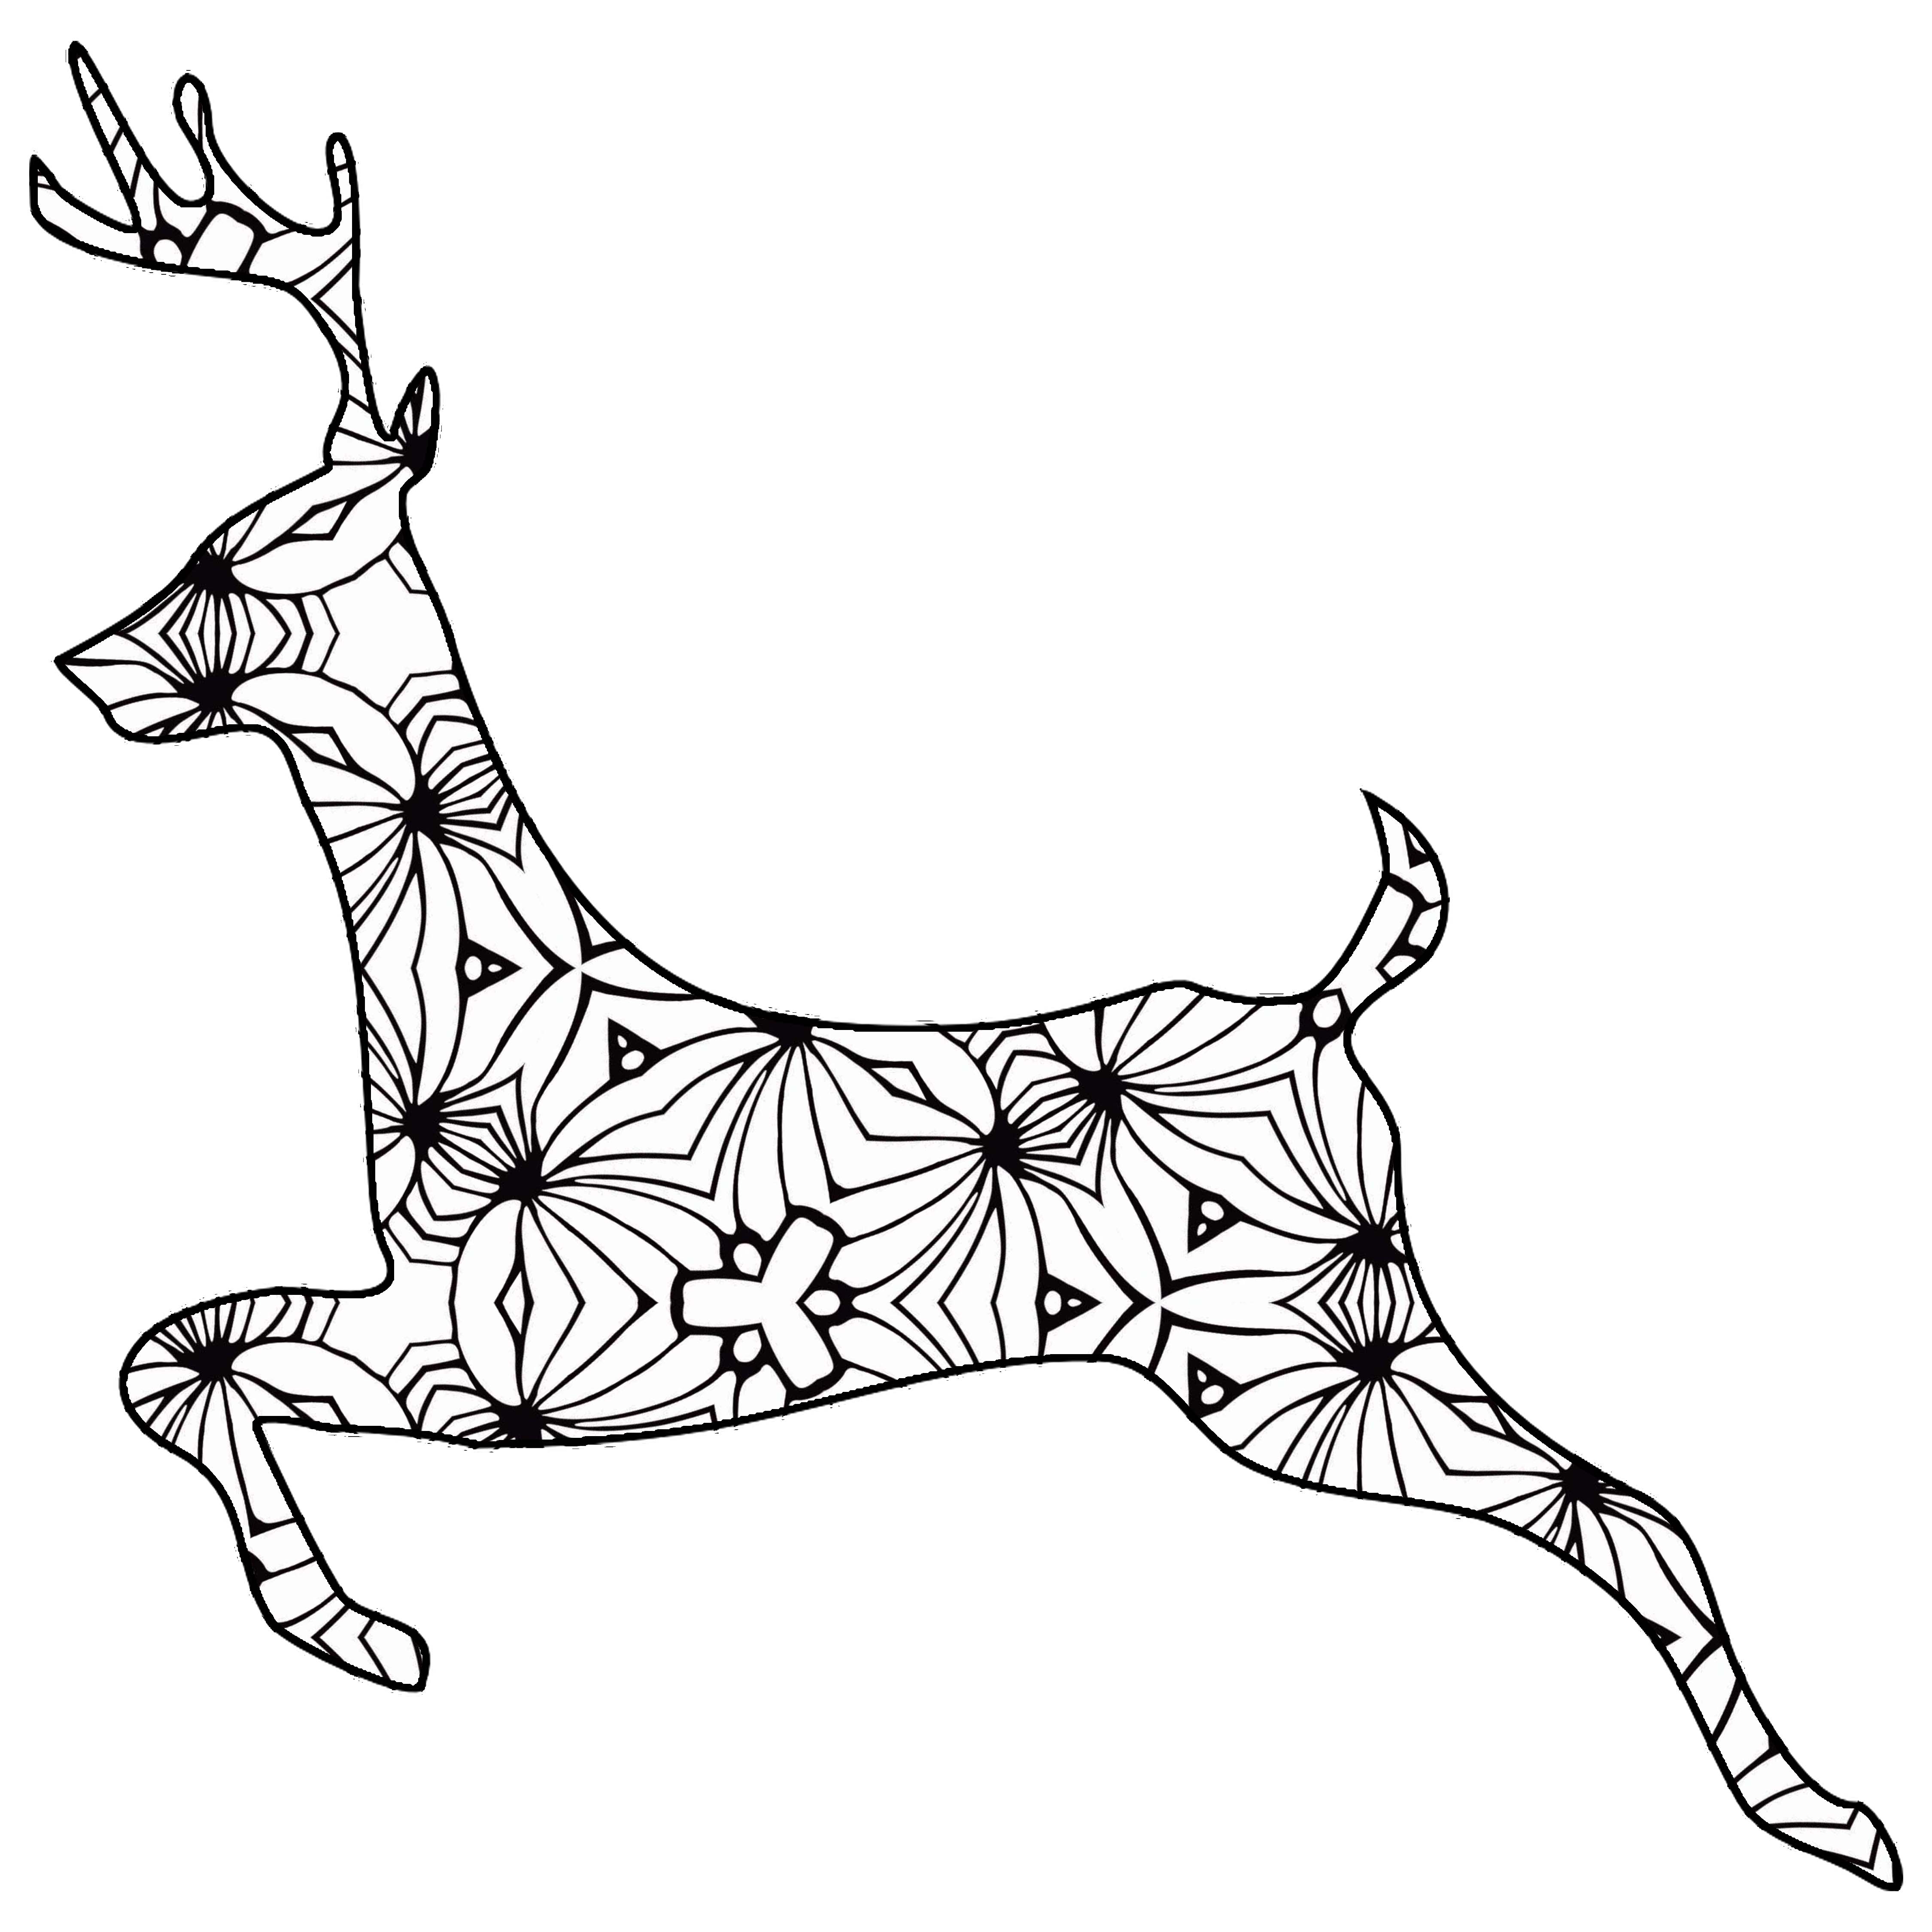 Download 30 Free Coloring Pages /// A Geometric Animal Coloring ...